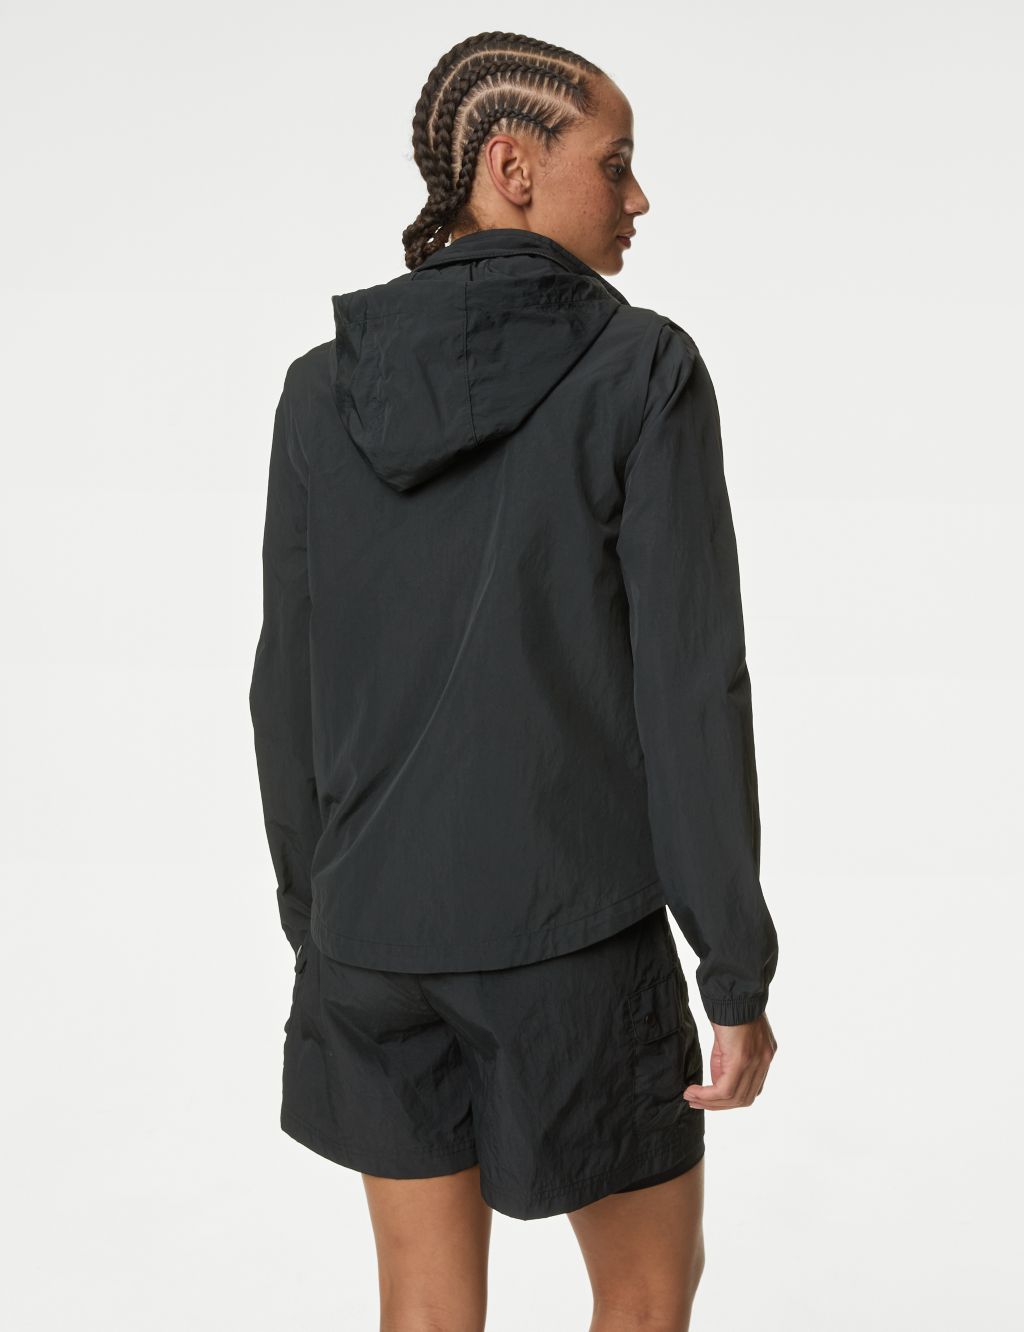 Convertible Sports Jacket with Stormwear™ 4 of 9